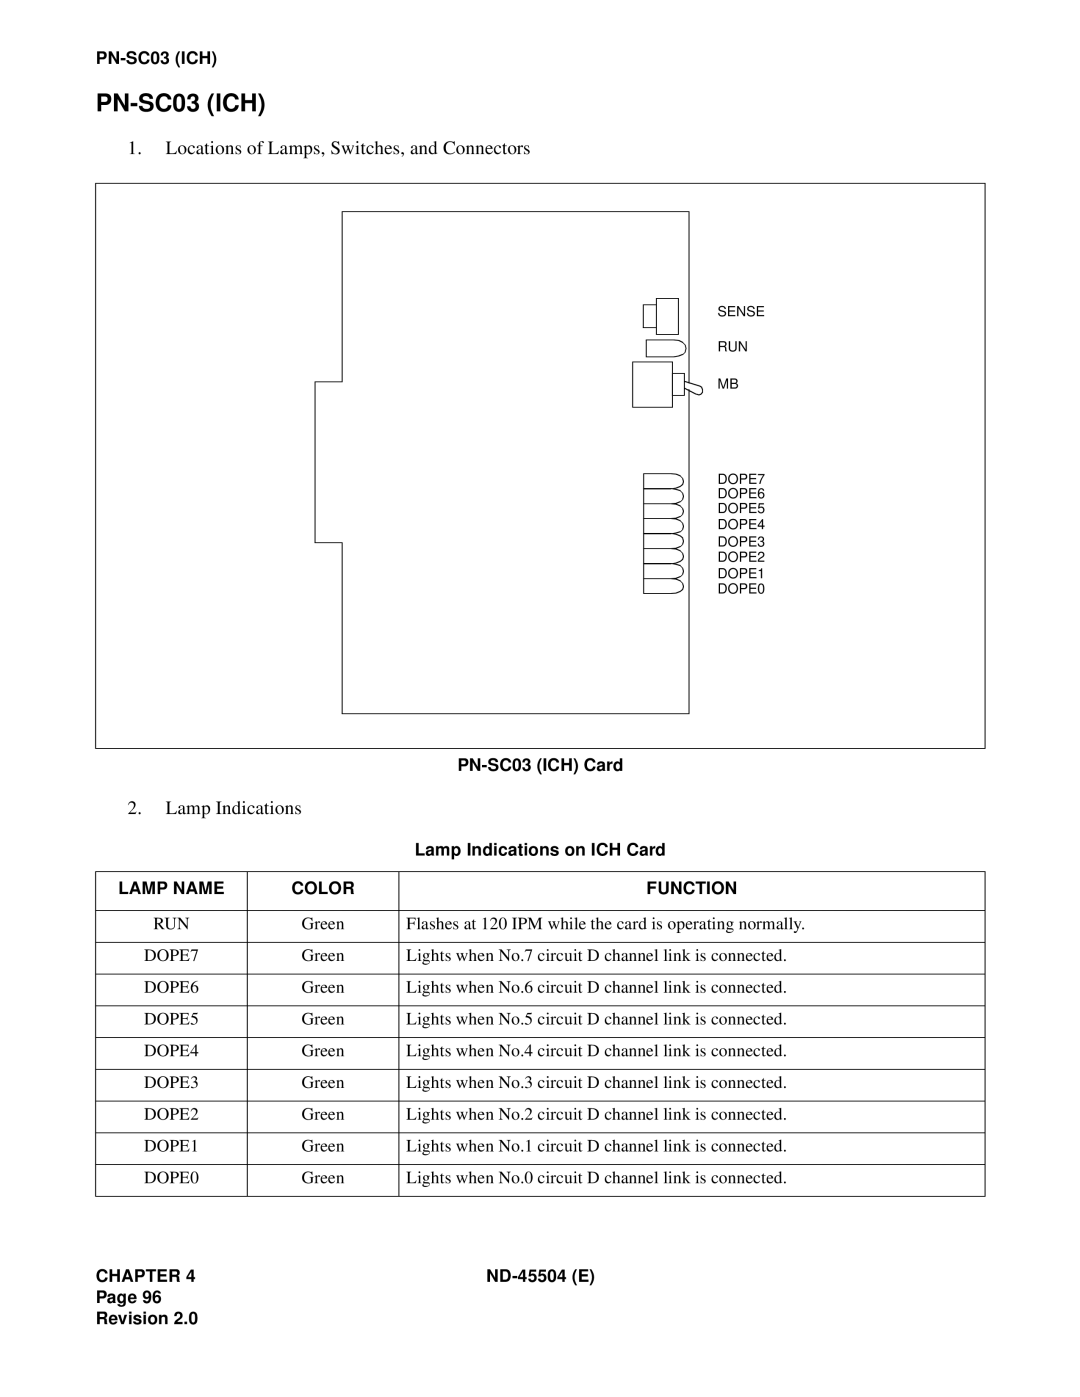 NEC 2000 IVS manual Locations of Lamps, Switches, and Connectors, Lamp Indications, PN-SC03ICH Card, Lamp Name, Color 